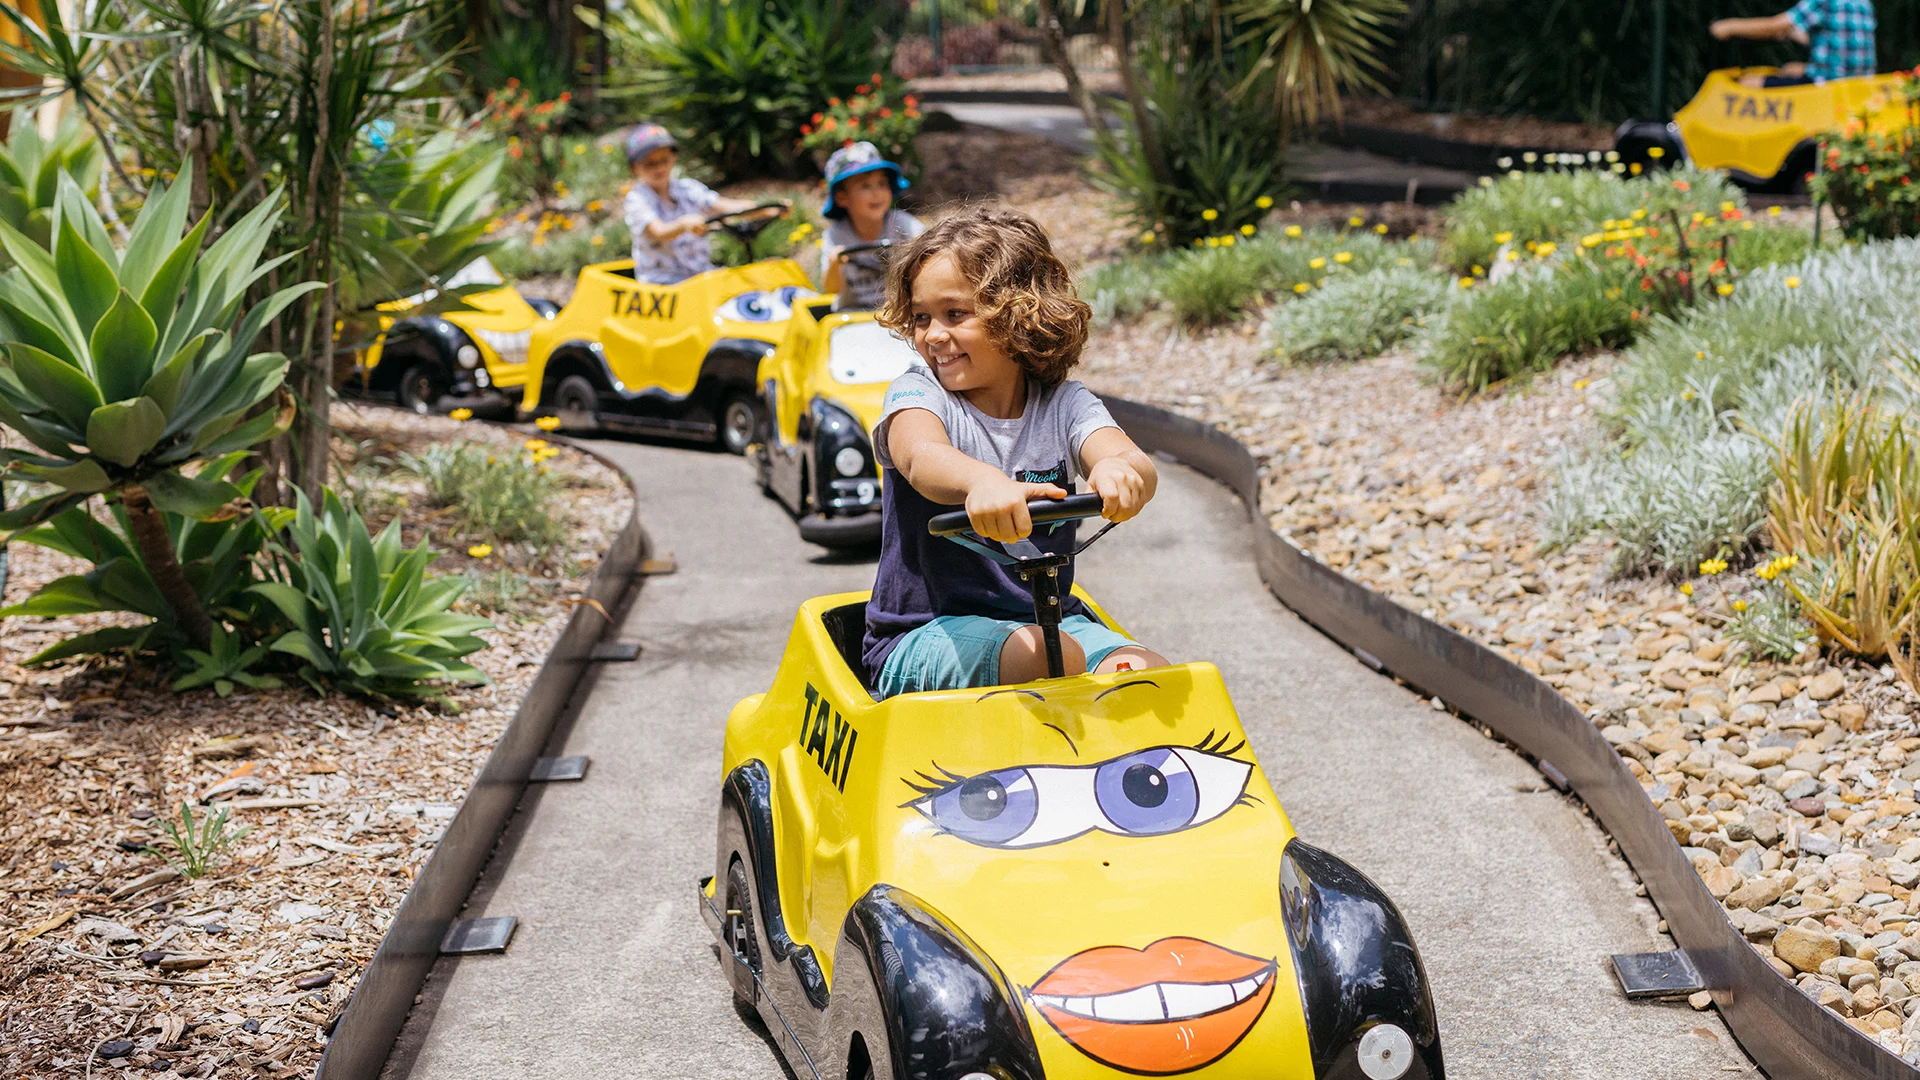 Excited children enjoying a ride on Speedy Gonzales' Tijuana Taxis at Warner Bros. Movie World, with colourful cars and joyful expressions, capturing the fun and excitement of the kids' ride experience